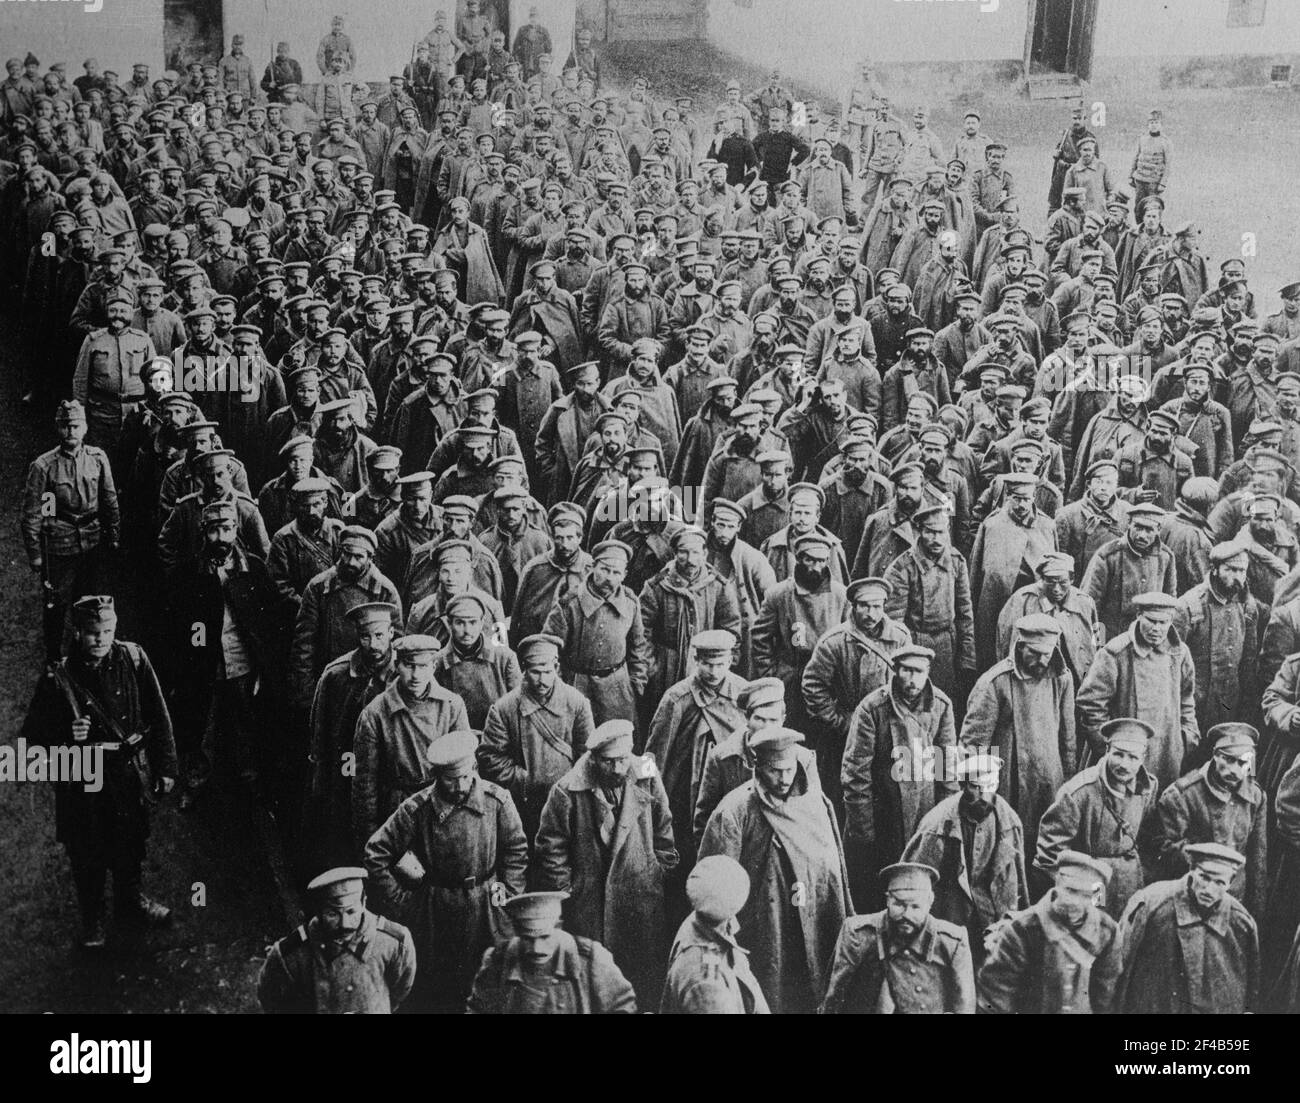 Russian soldiers taken prisoner by the Austro-Hungarian army at Przemysl Fortress, Przemysl, Austro-Hungarian Empire (now in Poland) during World War I ca. 1914-1915 Stock Photo